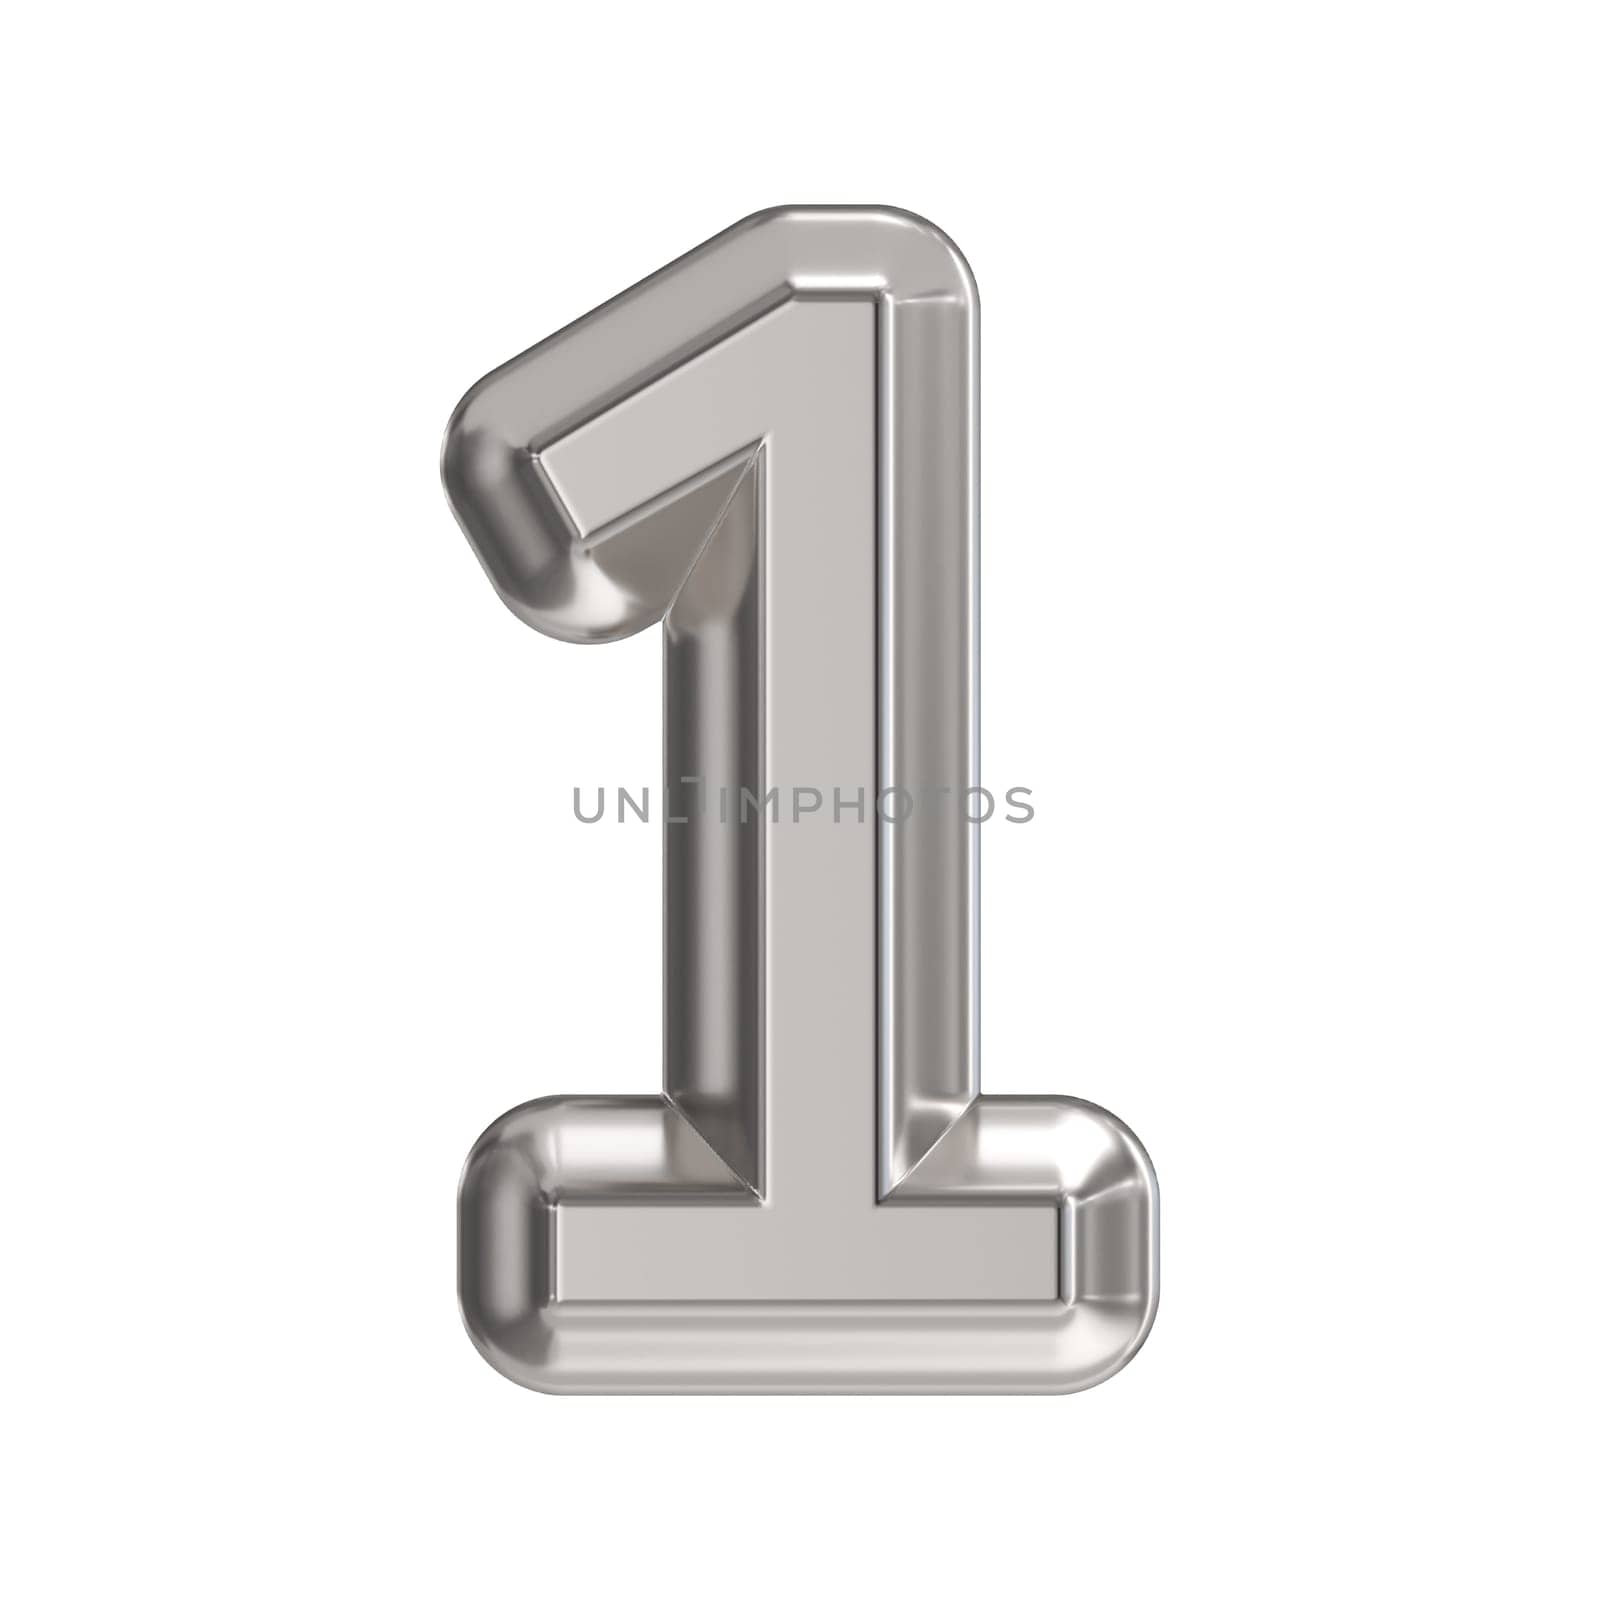 Steel font Number 1 ONE 3D rendering illustration isolated on white background